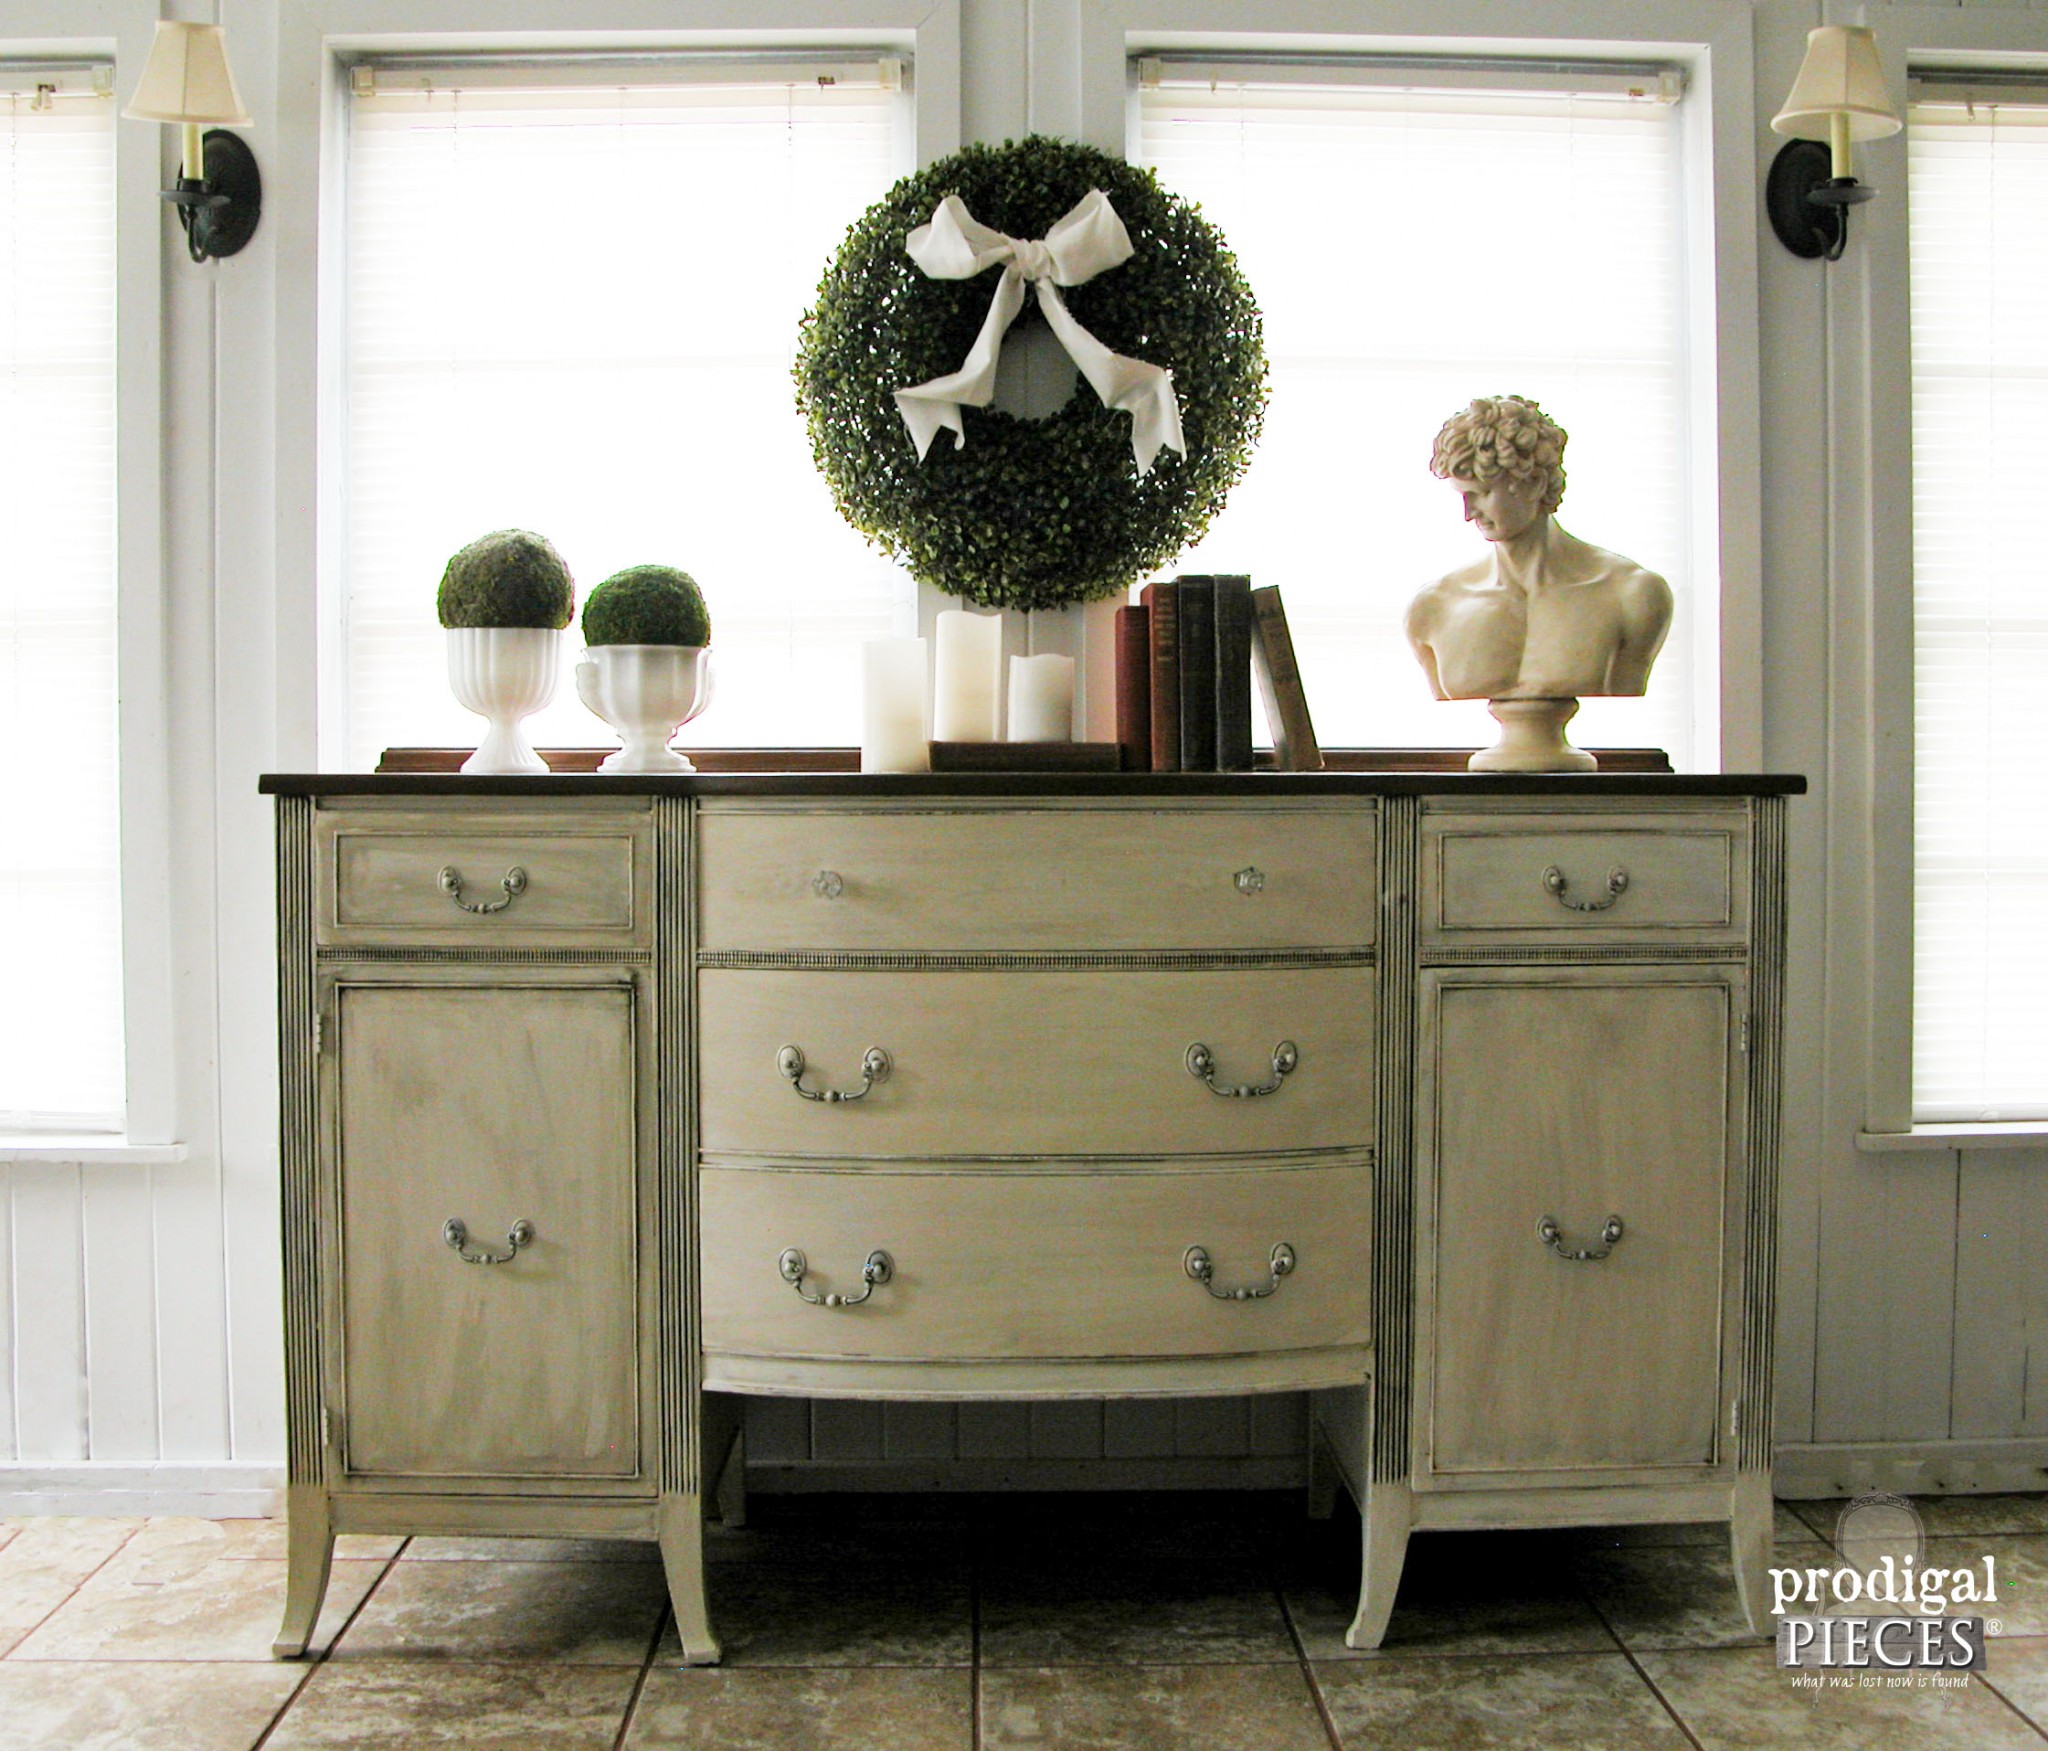 Vintage Duncan Phyfe Sideboard Gets Makeover by Prodigal Pieces | www.prodigalpieces.com